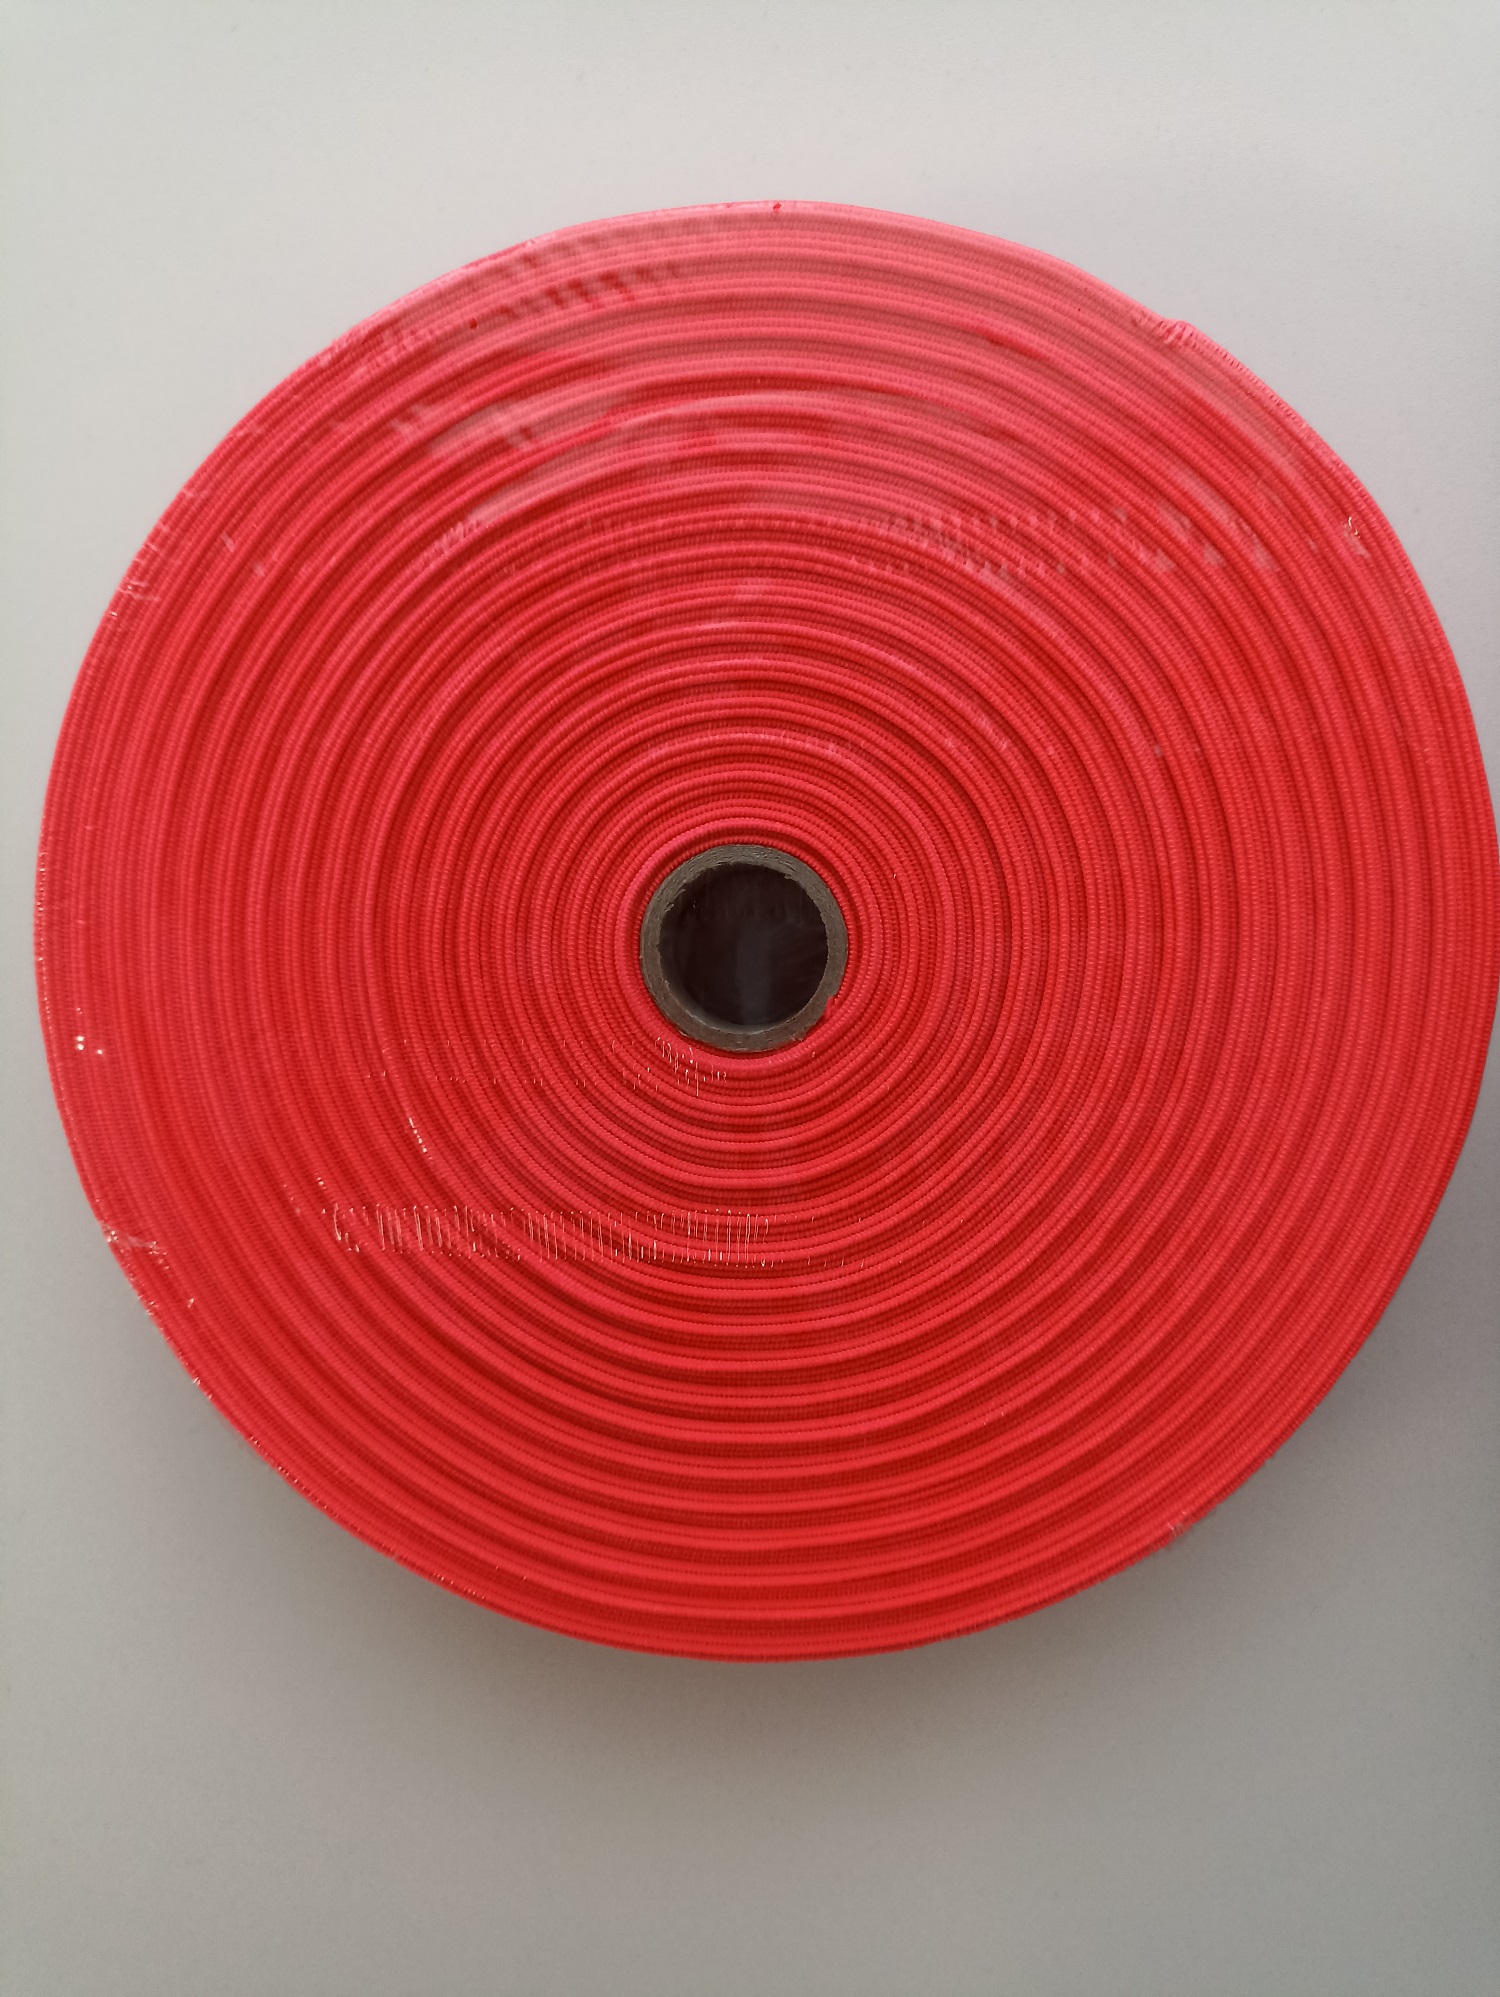 Rubber PEGA smooth width 20 mm, coil 25m, woven, neon pink